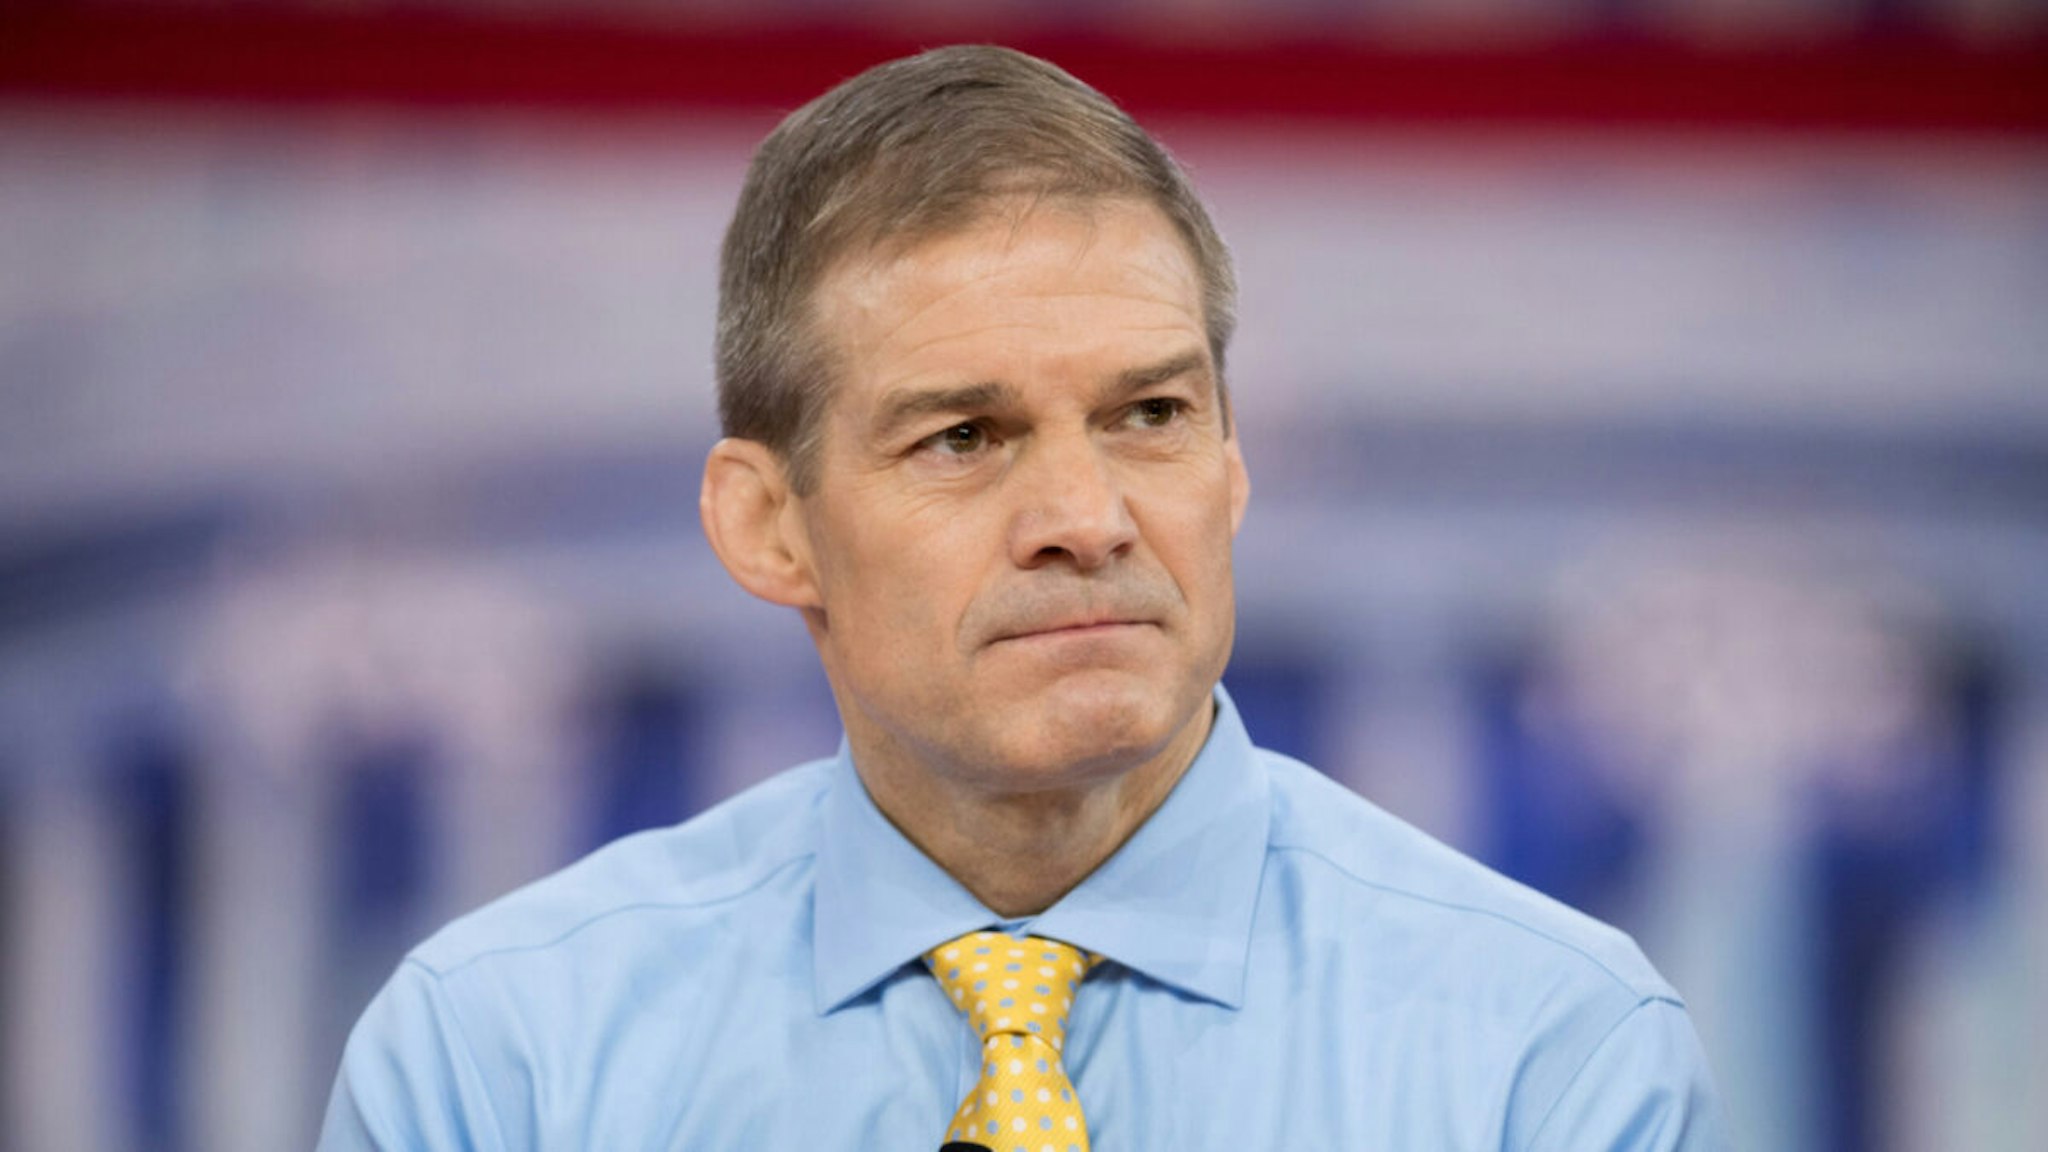 Representative Jim Jordan (R), Representative for Ohio's 4th congressional district, at the Conservative Political Action Conference (CPAC) sponsored by the American Conservative Union held at the Gaylord National Resort & Convention Center in Oxon Hill.